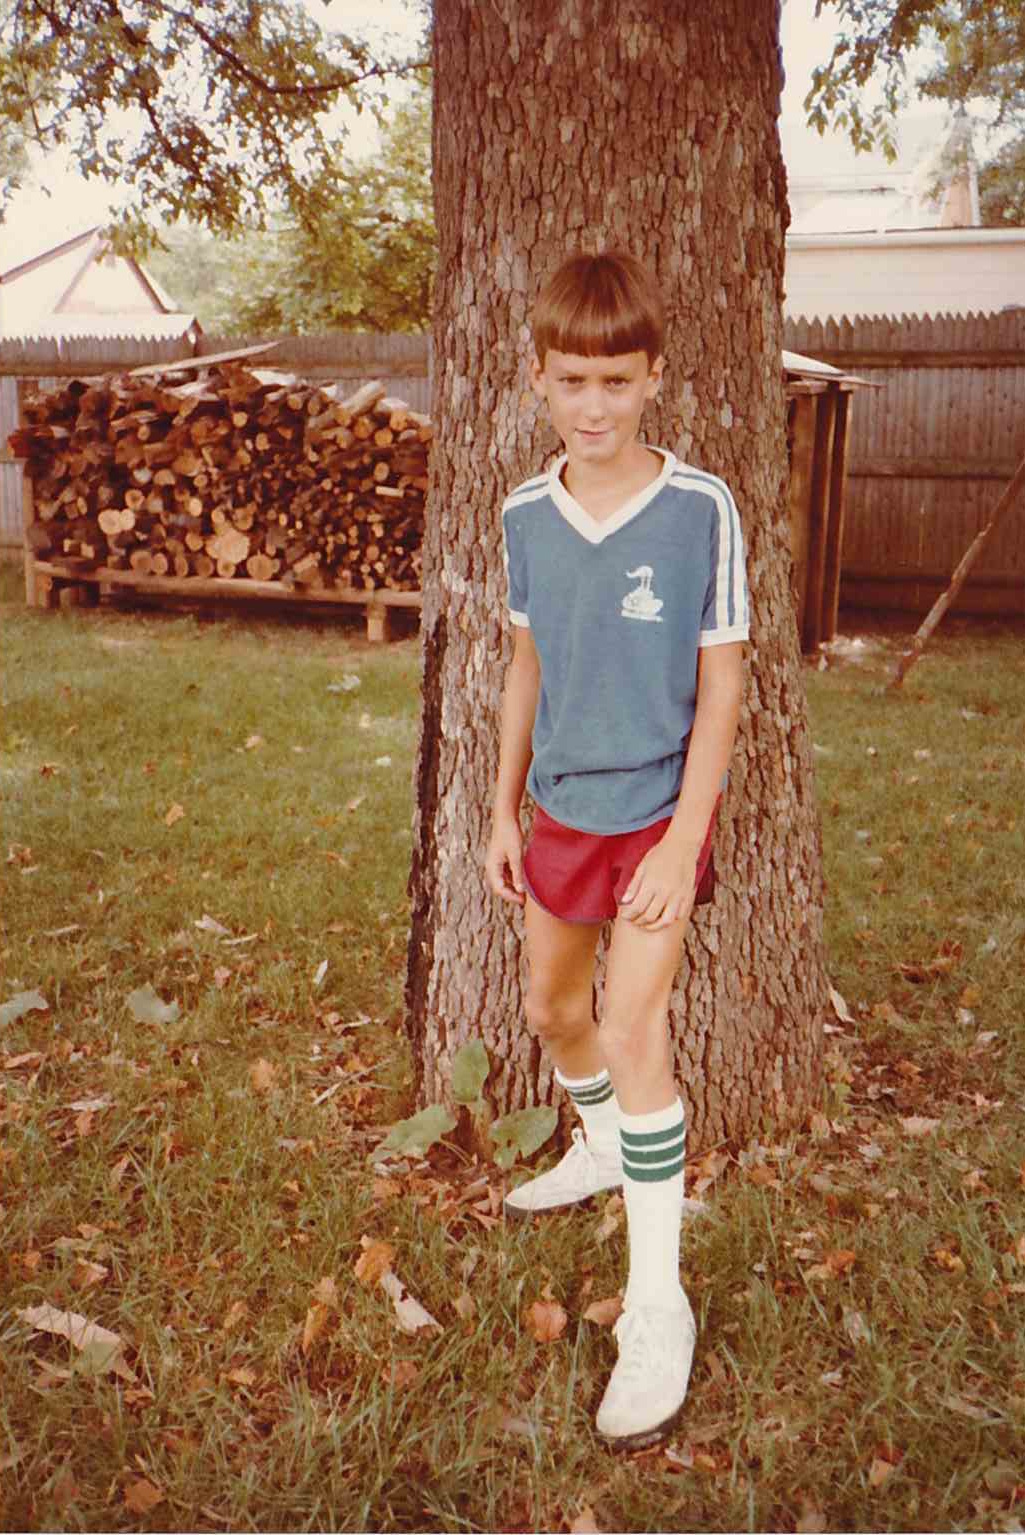 Soccer Outfit 1982 (#TBT) – The Curtis Home Website